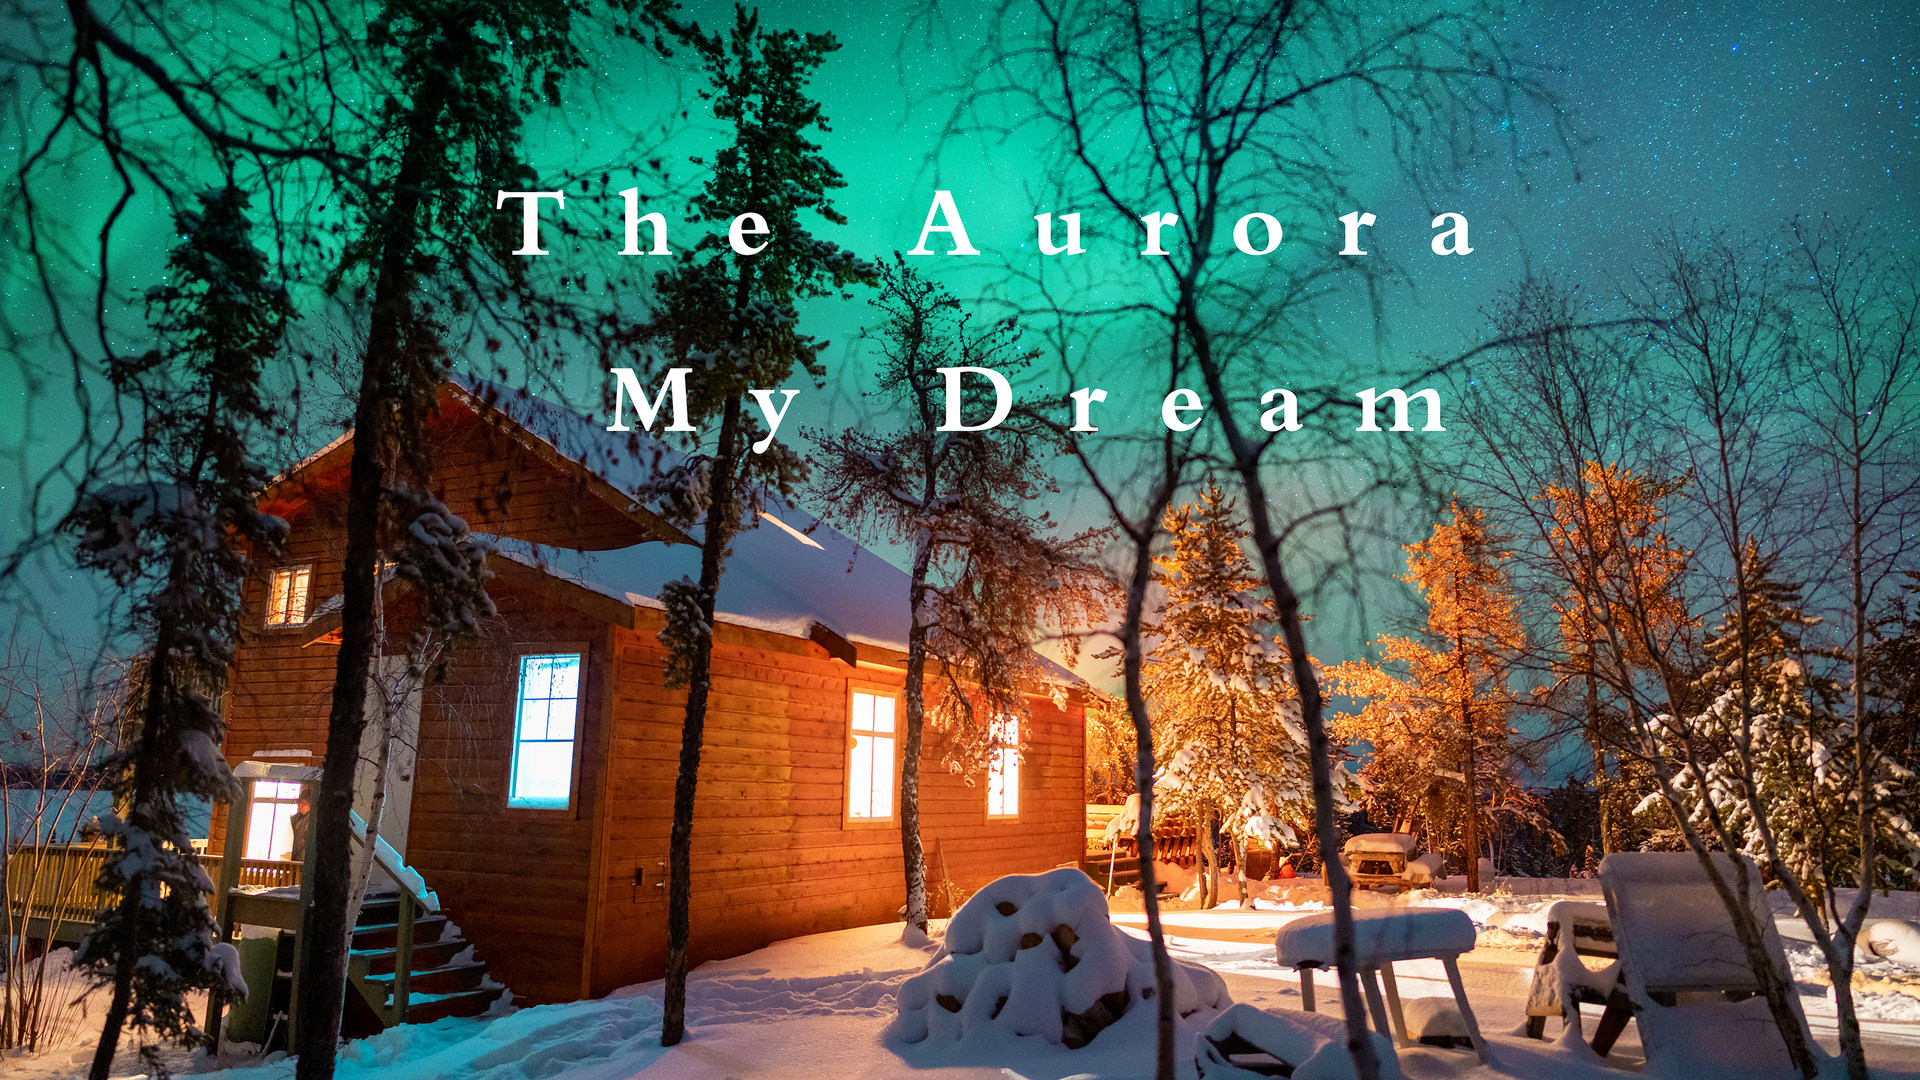 SkyPixel 6th Anniversary Contest Nominated Entries THE AURORA MY DREAM